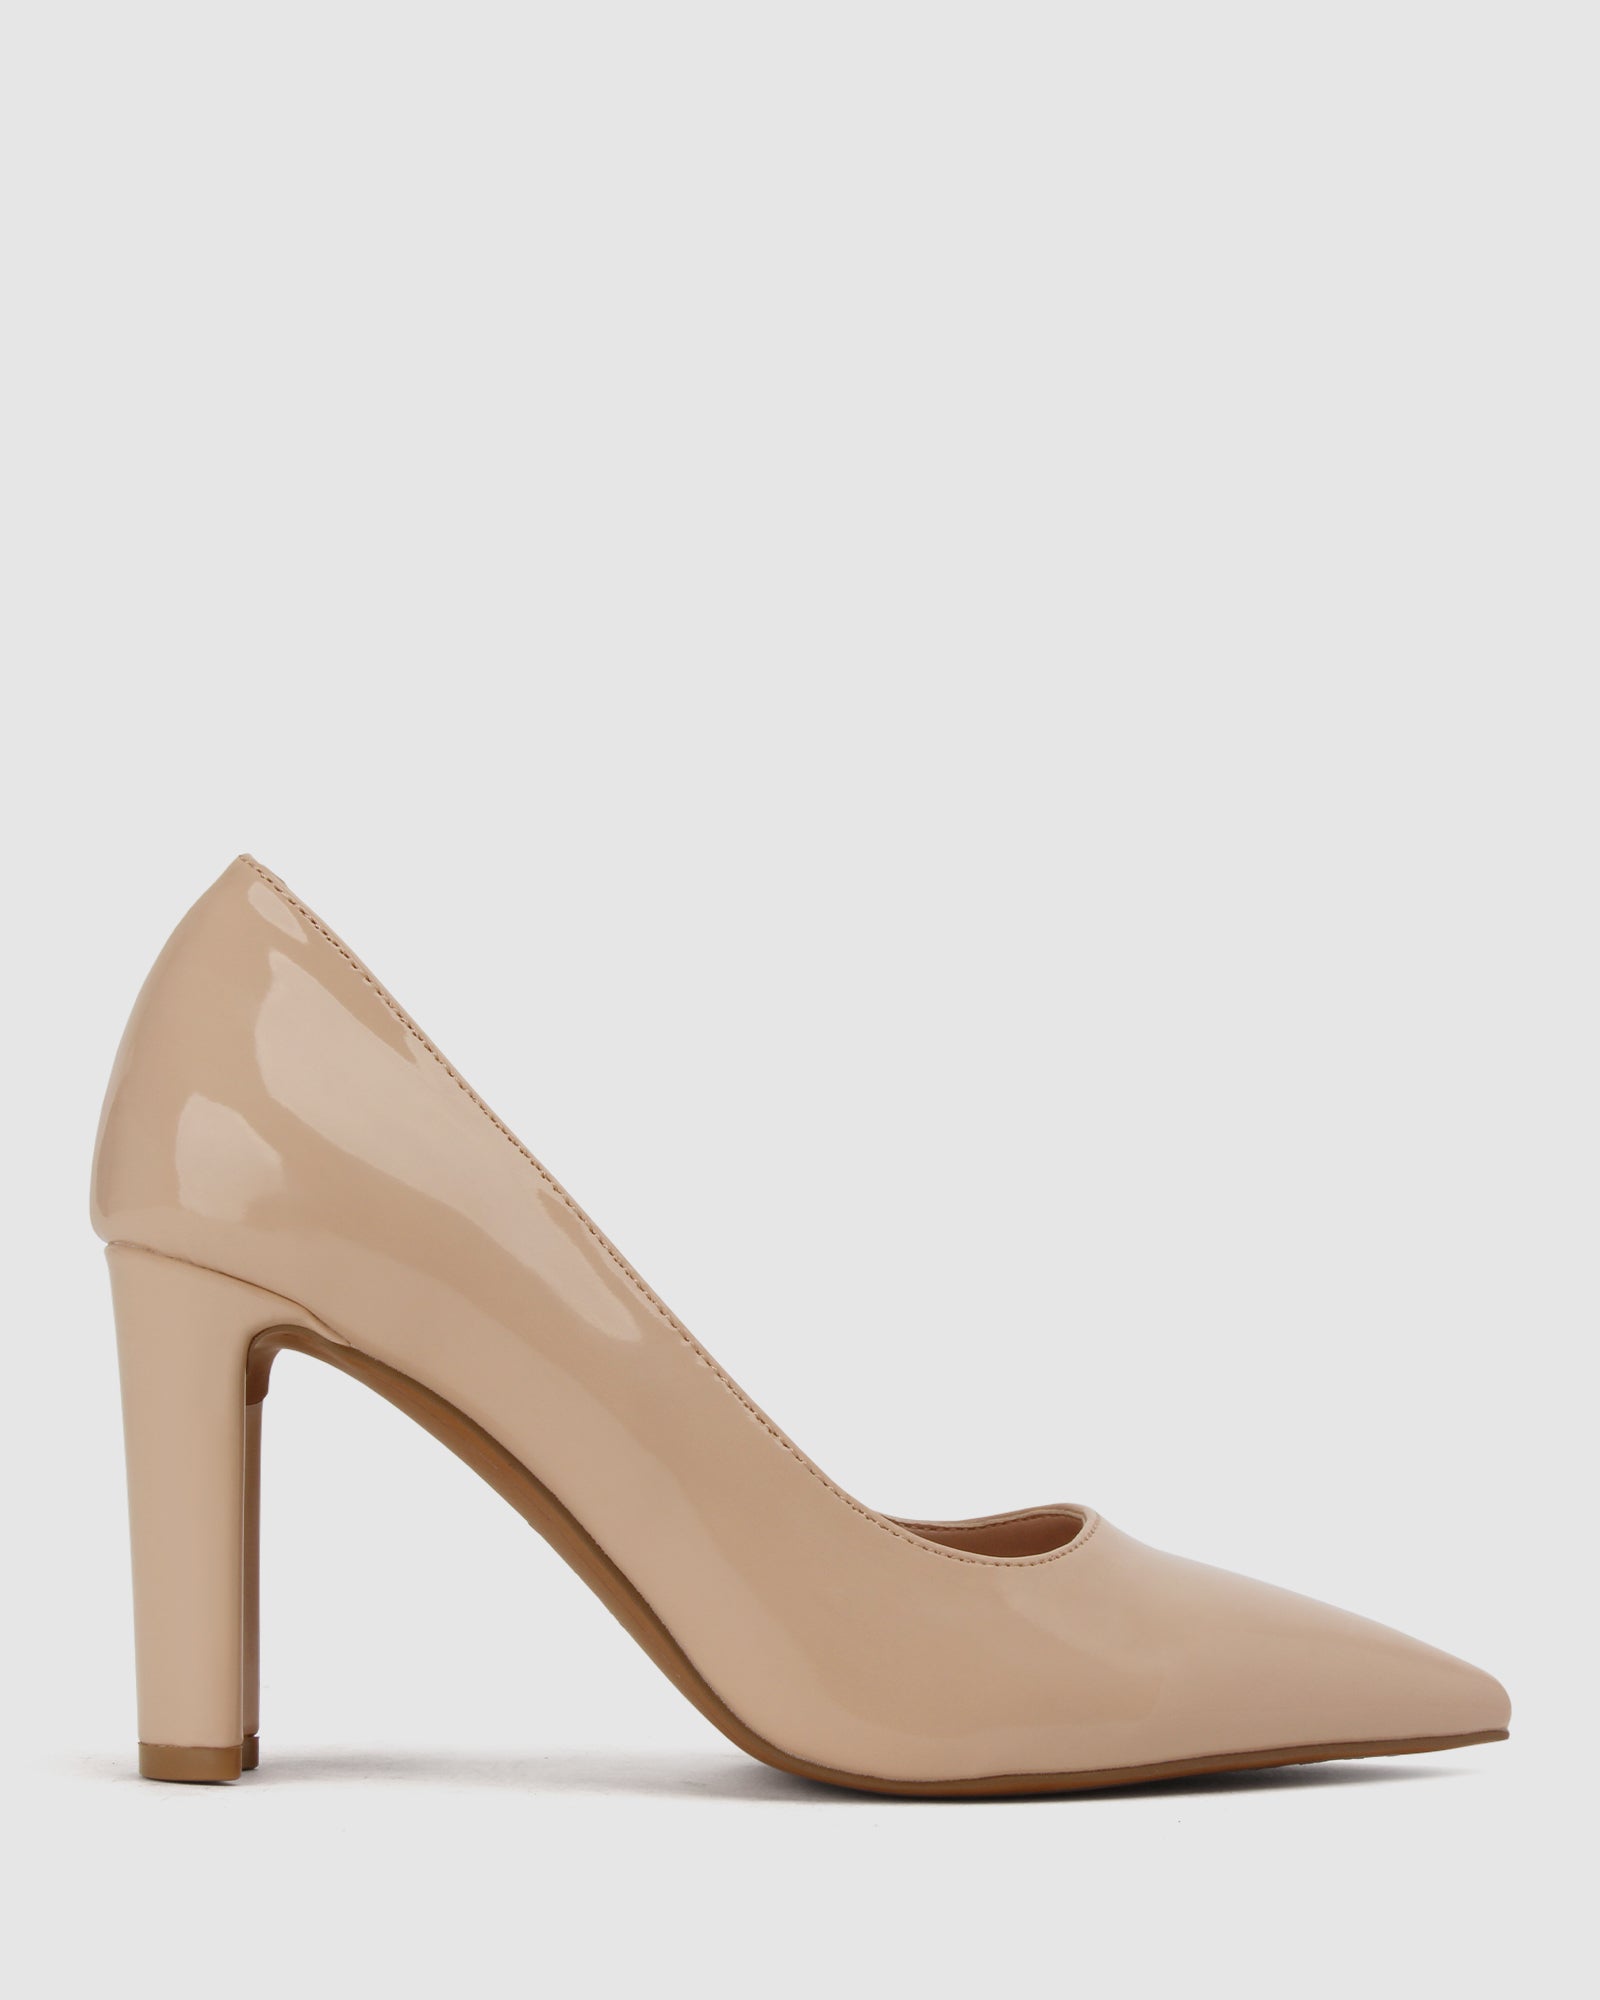 Buy MIGHT Pointed Toe Pumps by Betts online - Betts